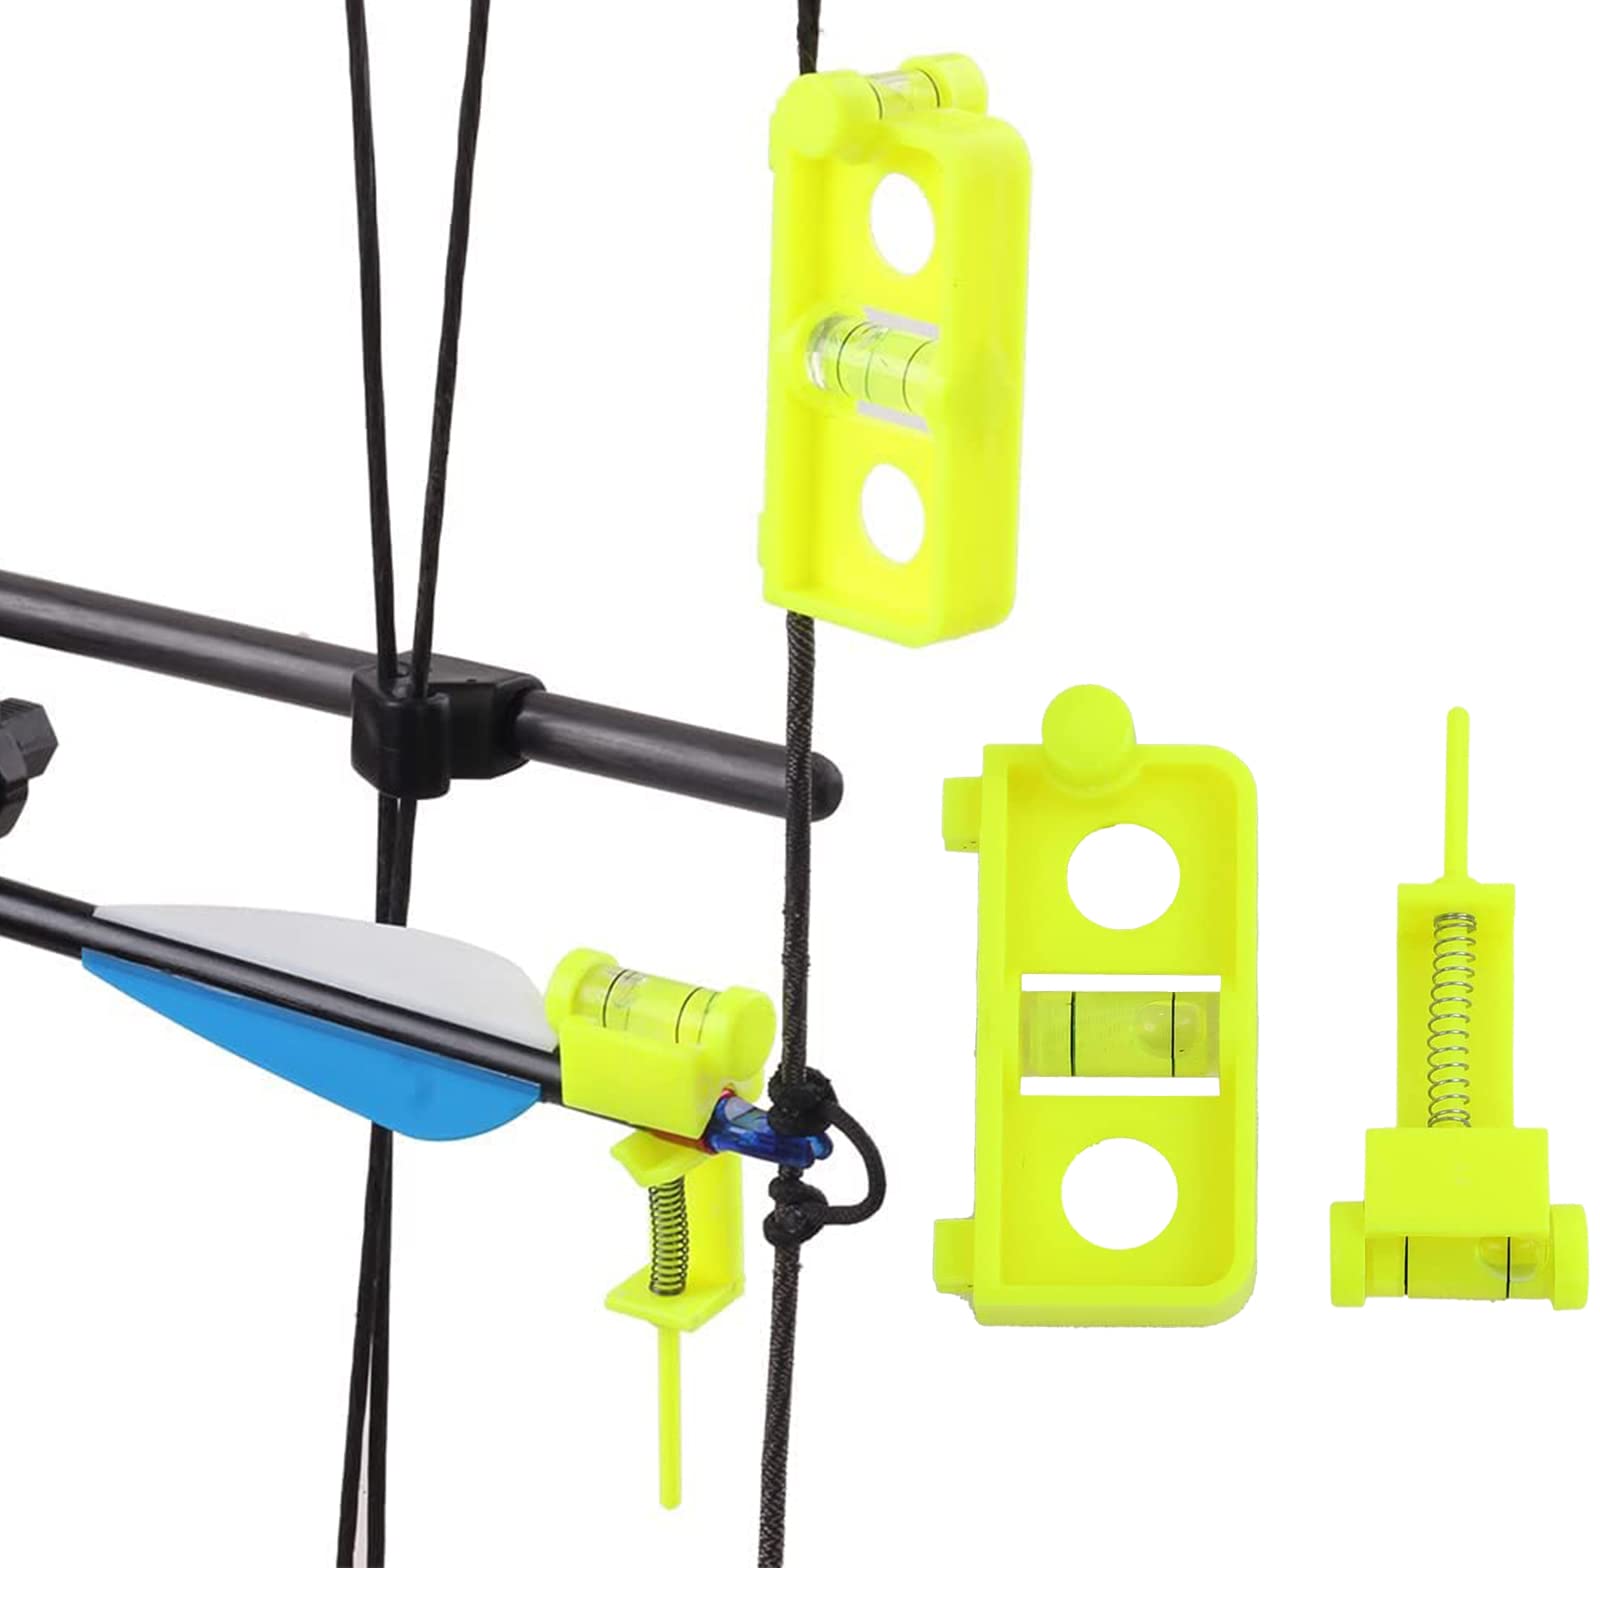 SOPOGER Archery Multifunctional Bow Level Tuning and Mounting String 3D  Printing Compound Bow Sight Tuning Bubble Level Combo Tool Kit for Compound  Bows Yellow